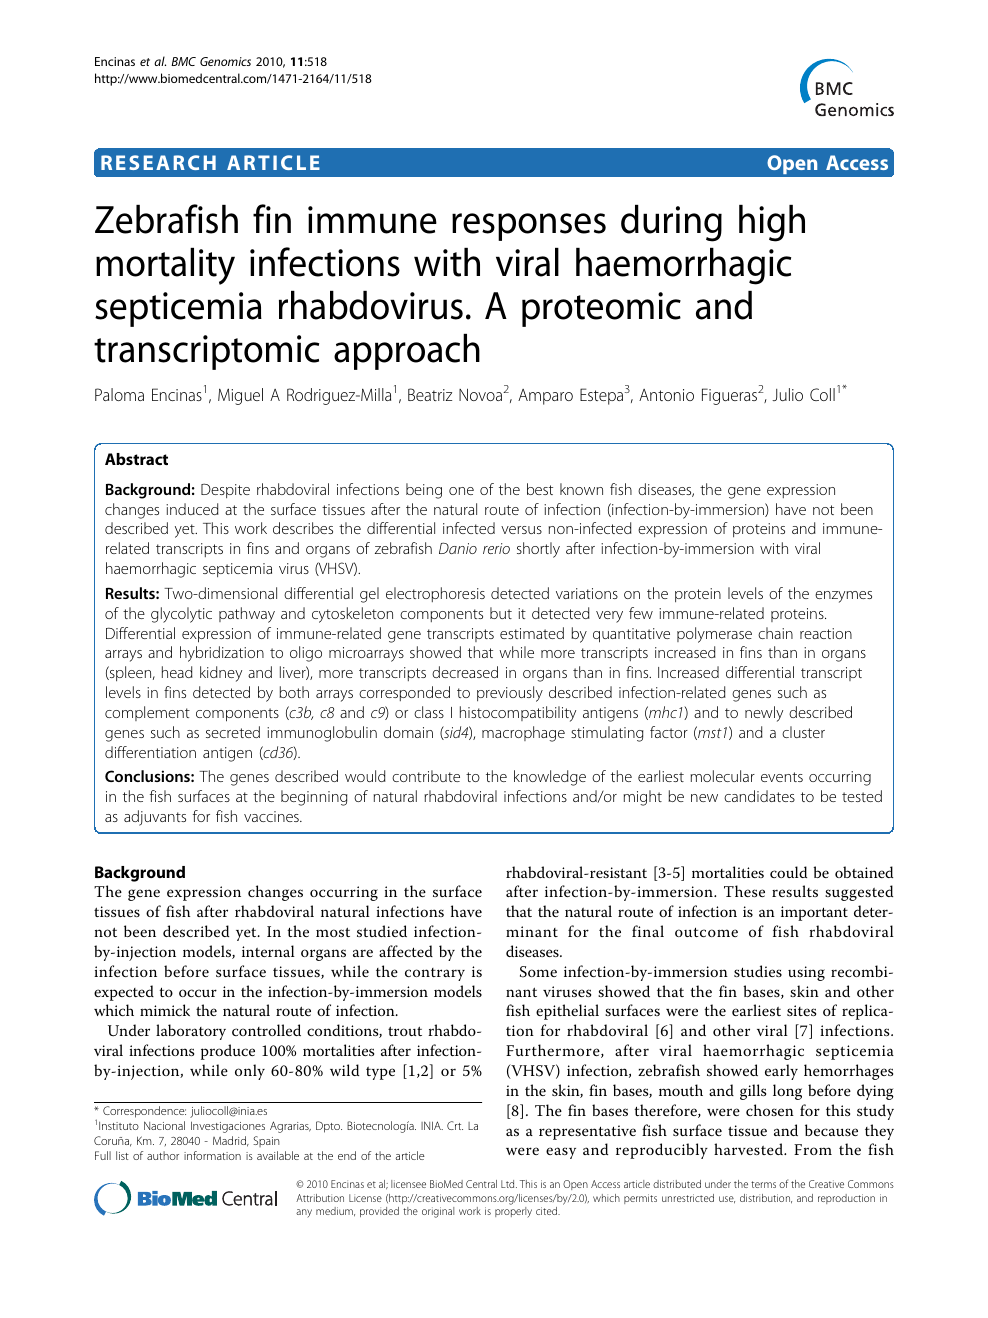 Zebrafish Fin Immune Responses During High Mortality Infections With Viral Haemorrhagic Septicemia Rhabdovirus A Proteomic And Transcriptomic Approach Topic Of Research Paper In Biological Sciences Download Scholarly Article Pdf And Read